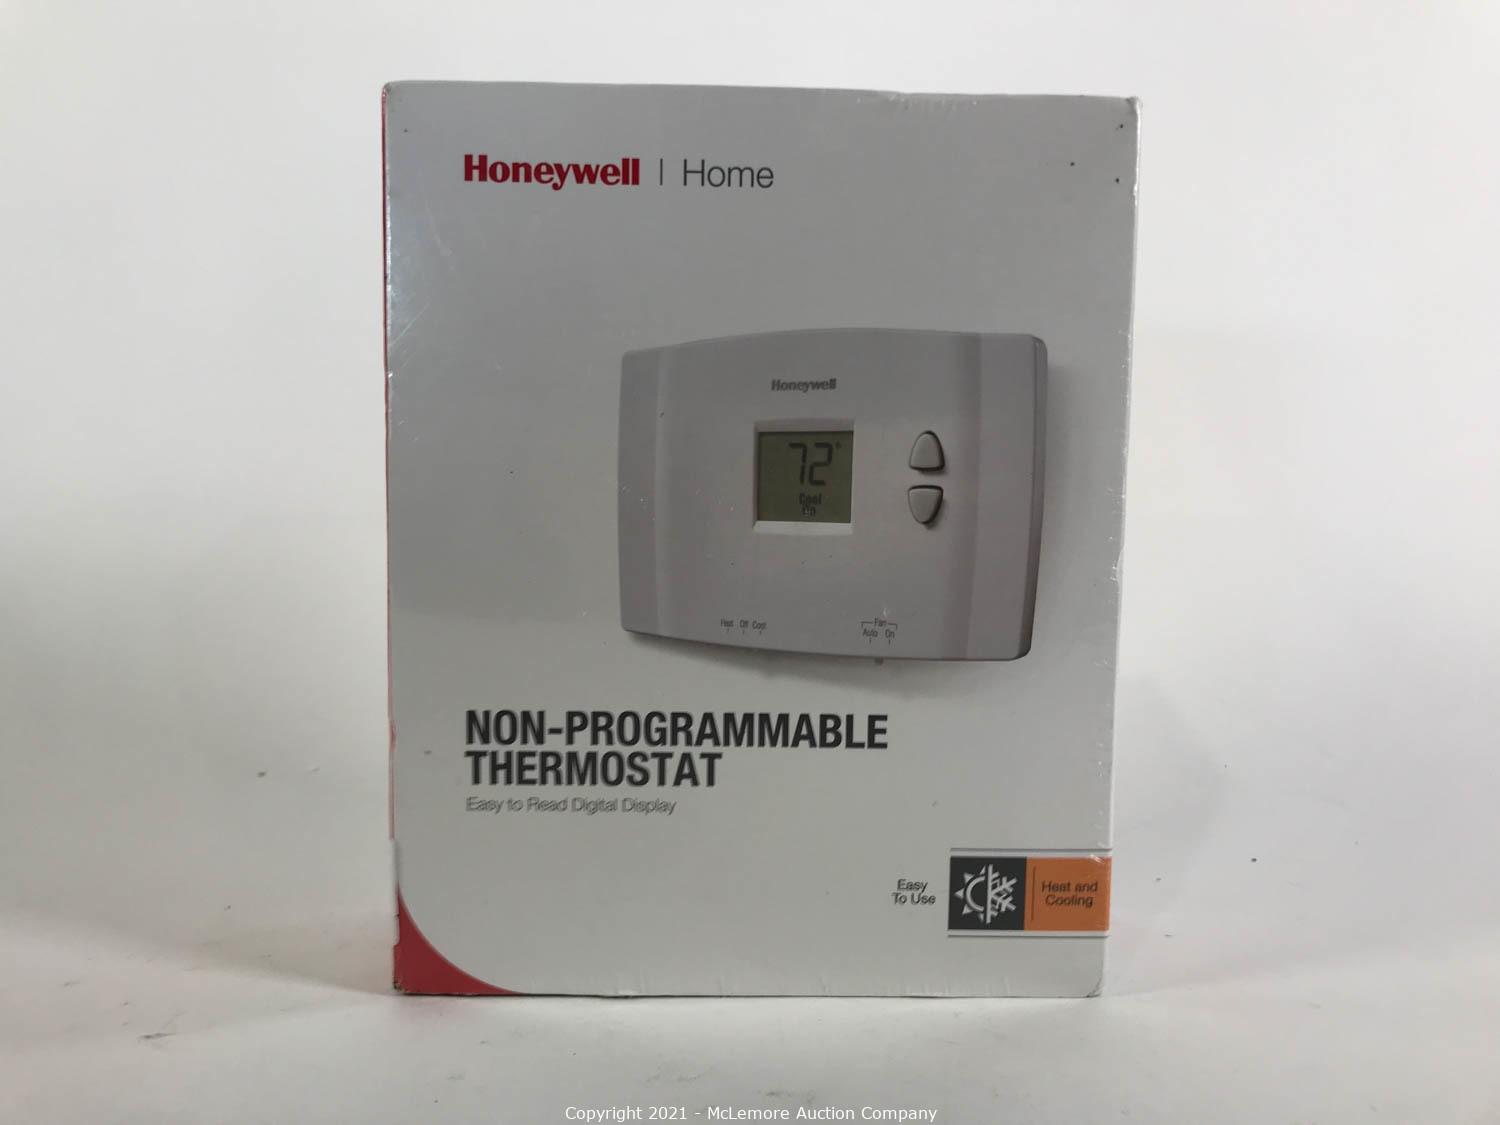 Honeywell Home RTH111B Digital Non-Programmable Thermostat